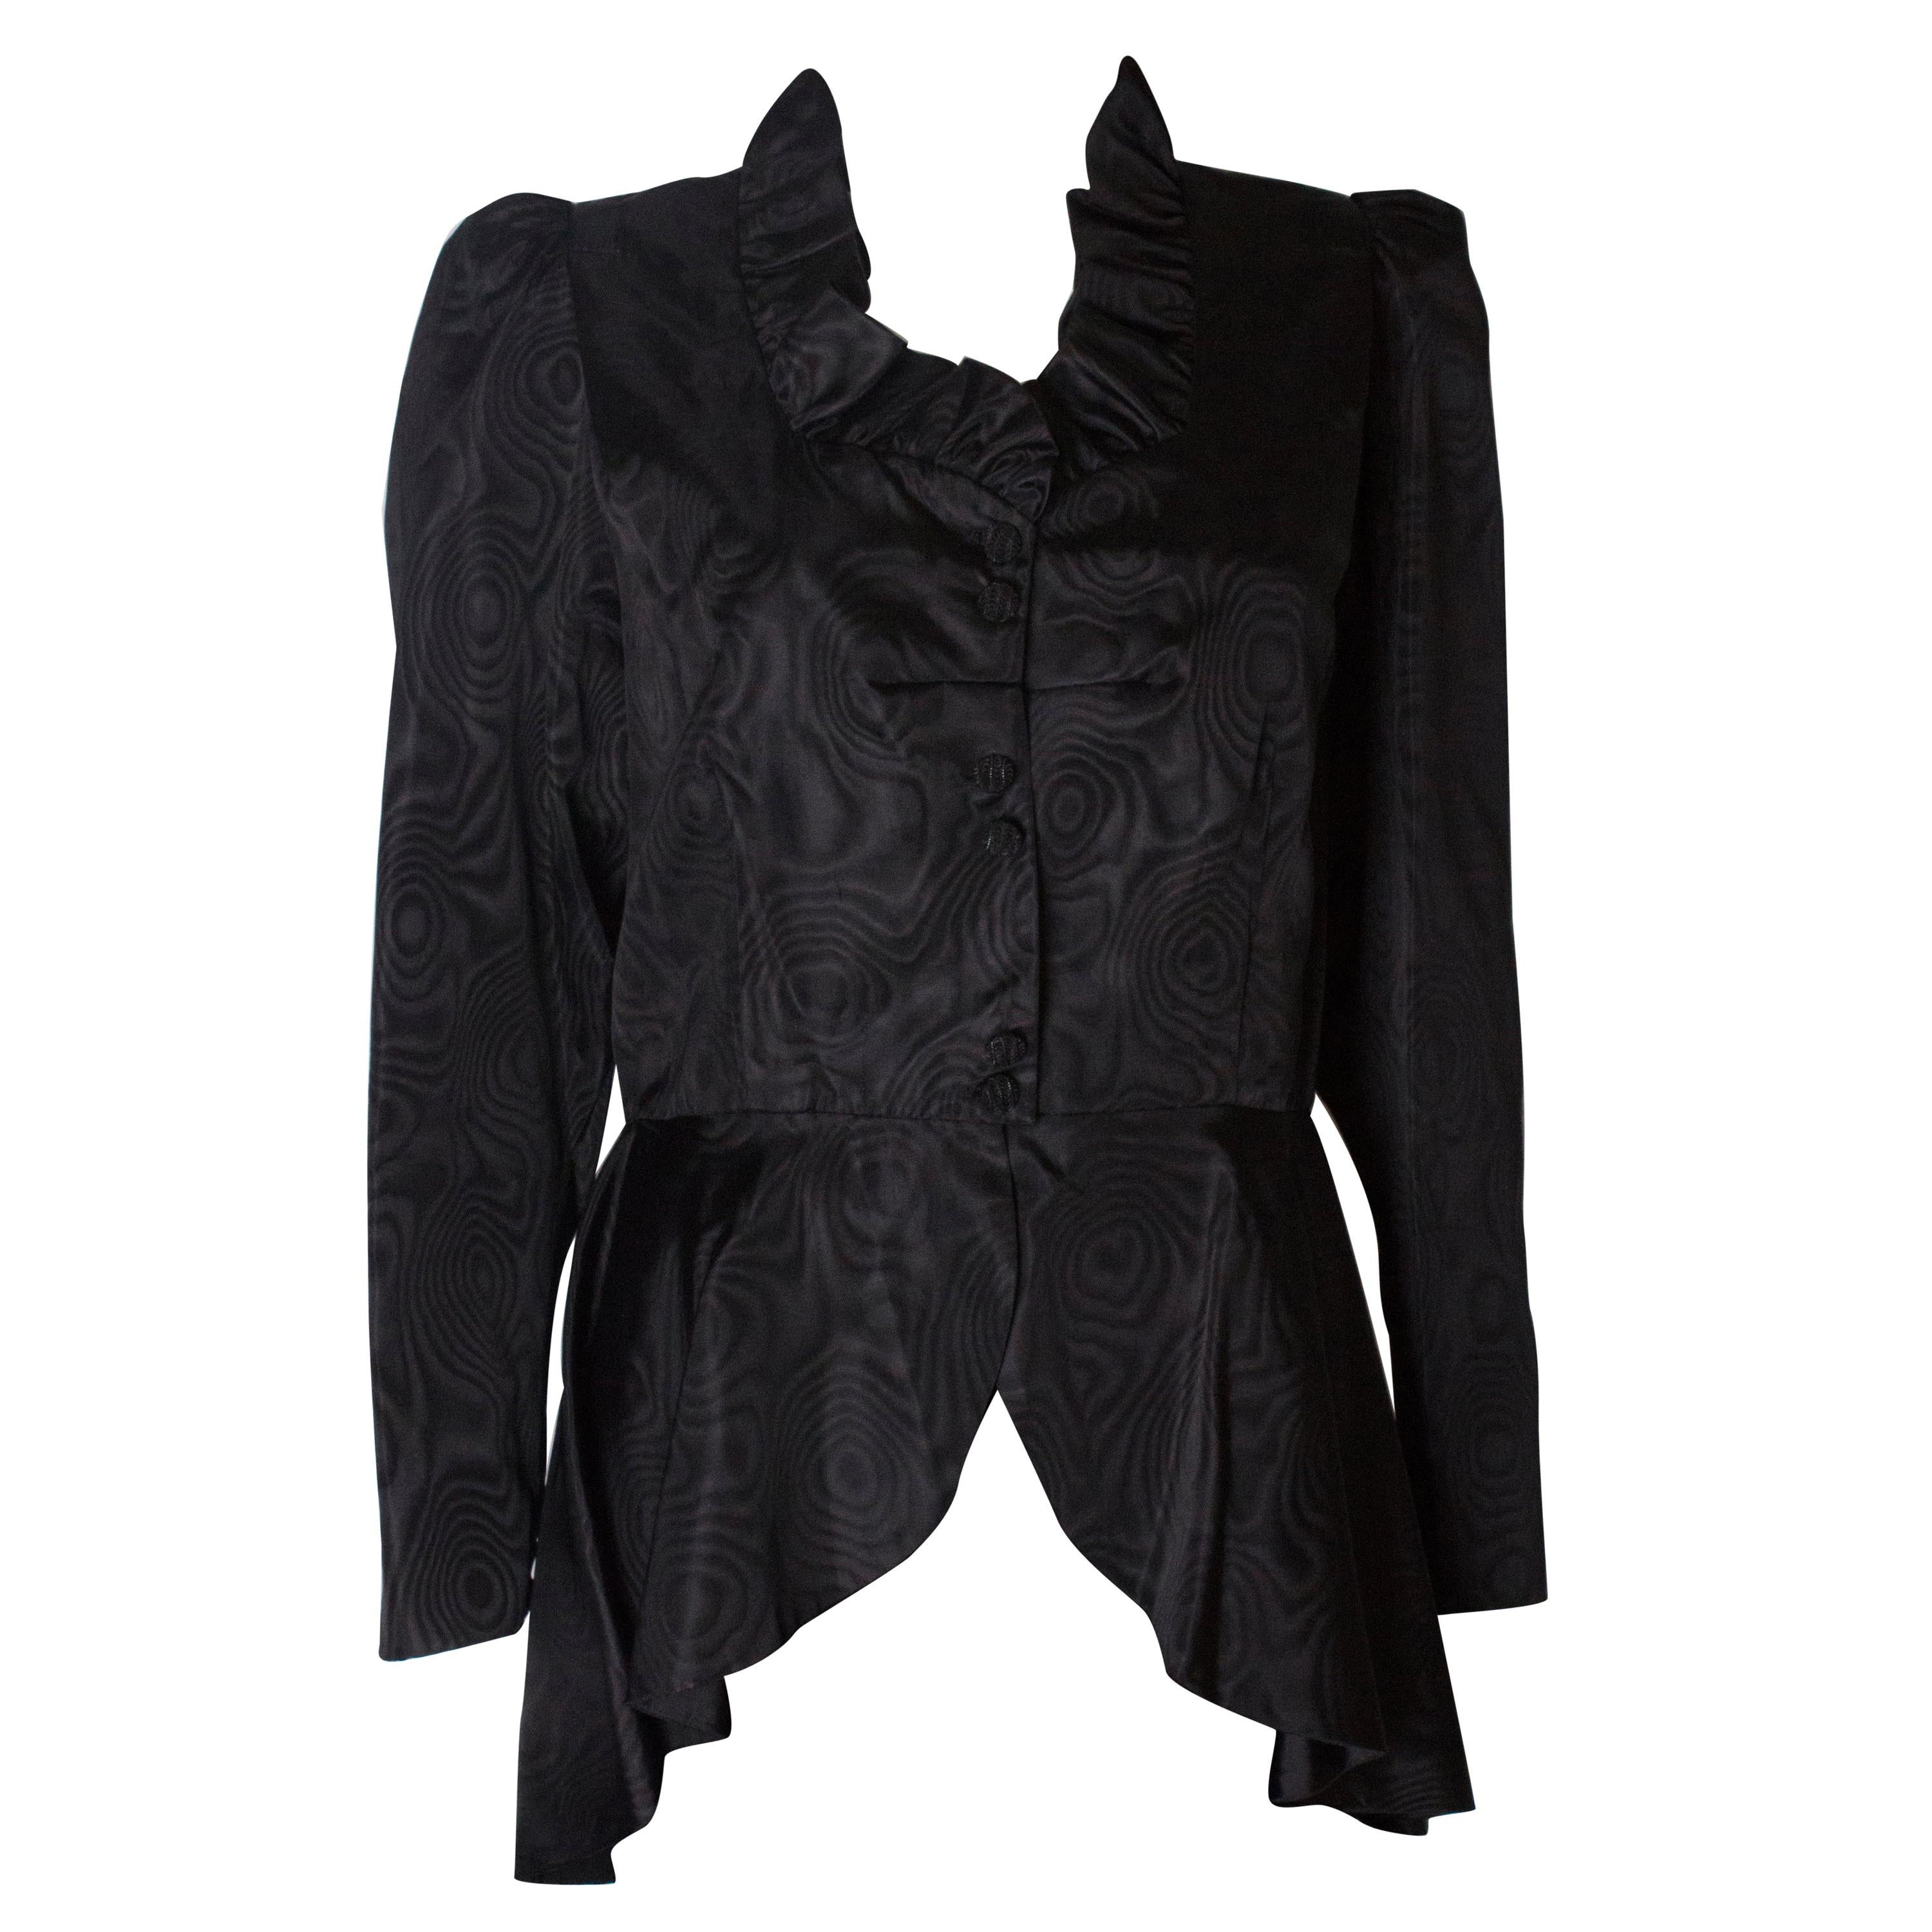 Black Moire Silk Vintage Jacket with Frill Edged Collar and Peplum For Sale